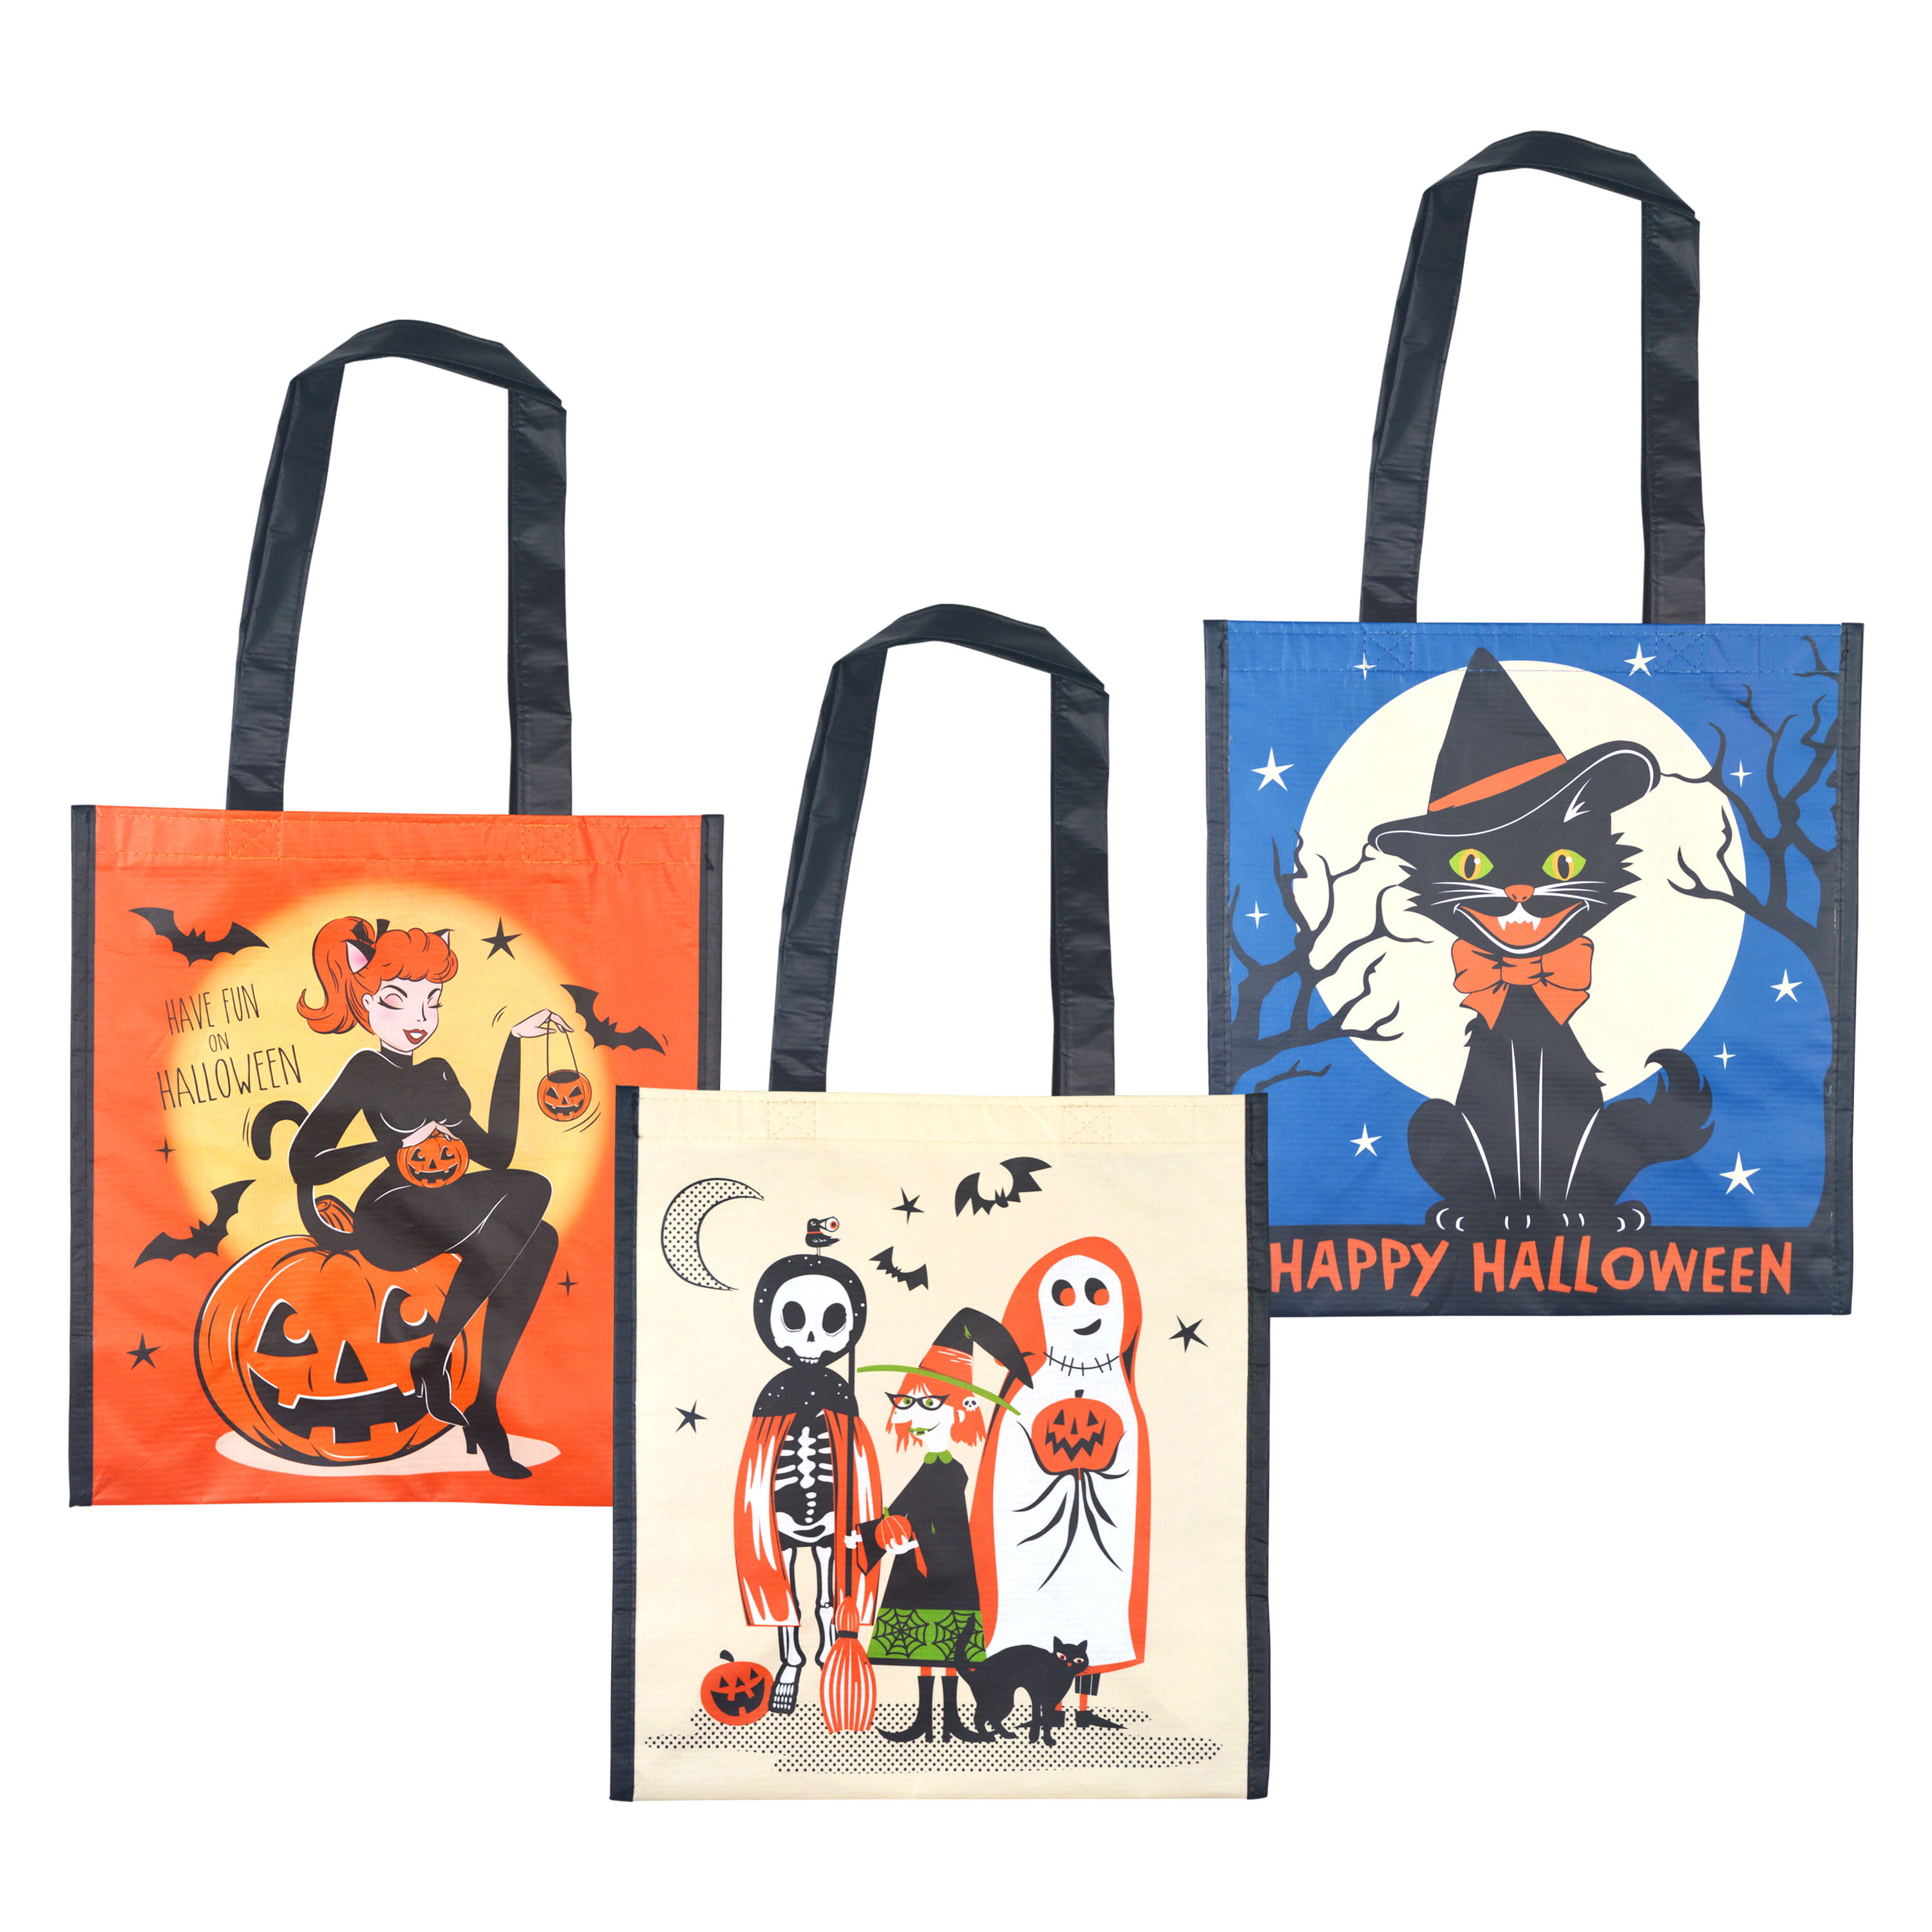 (3-Pack) Heavy duty, durable, Water Resistant Halloween Eco Treat / Grocery Bags $2.07 + FS w/ W+